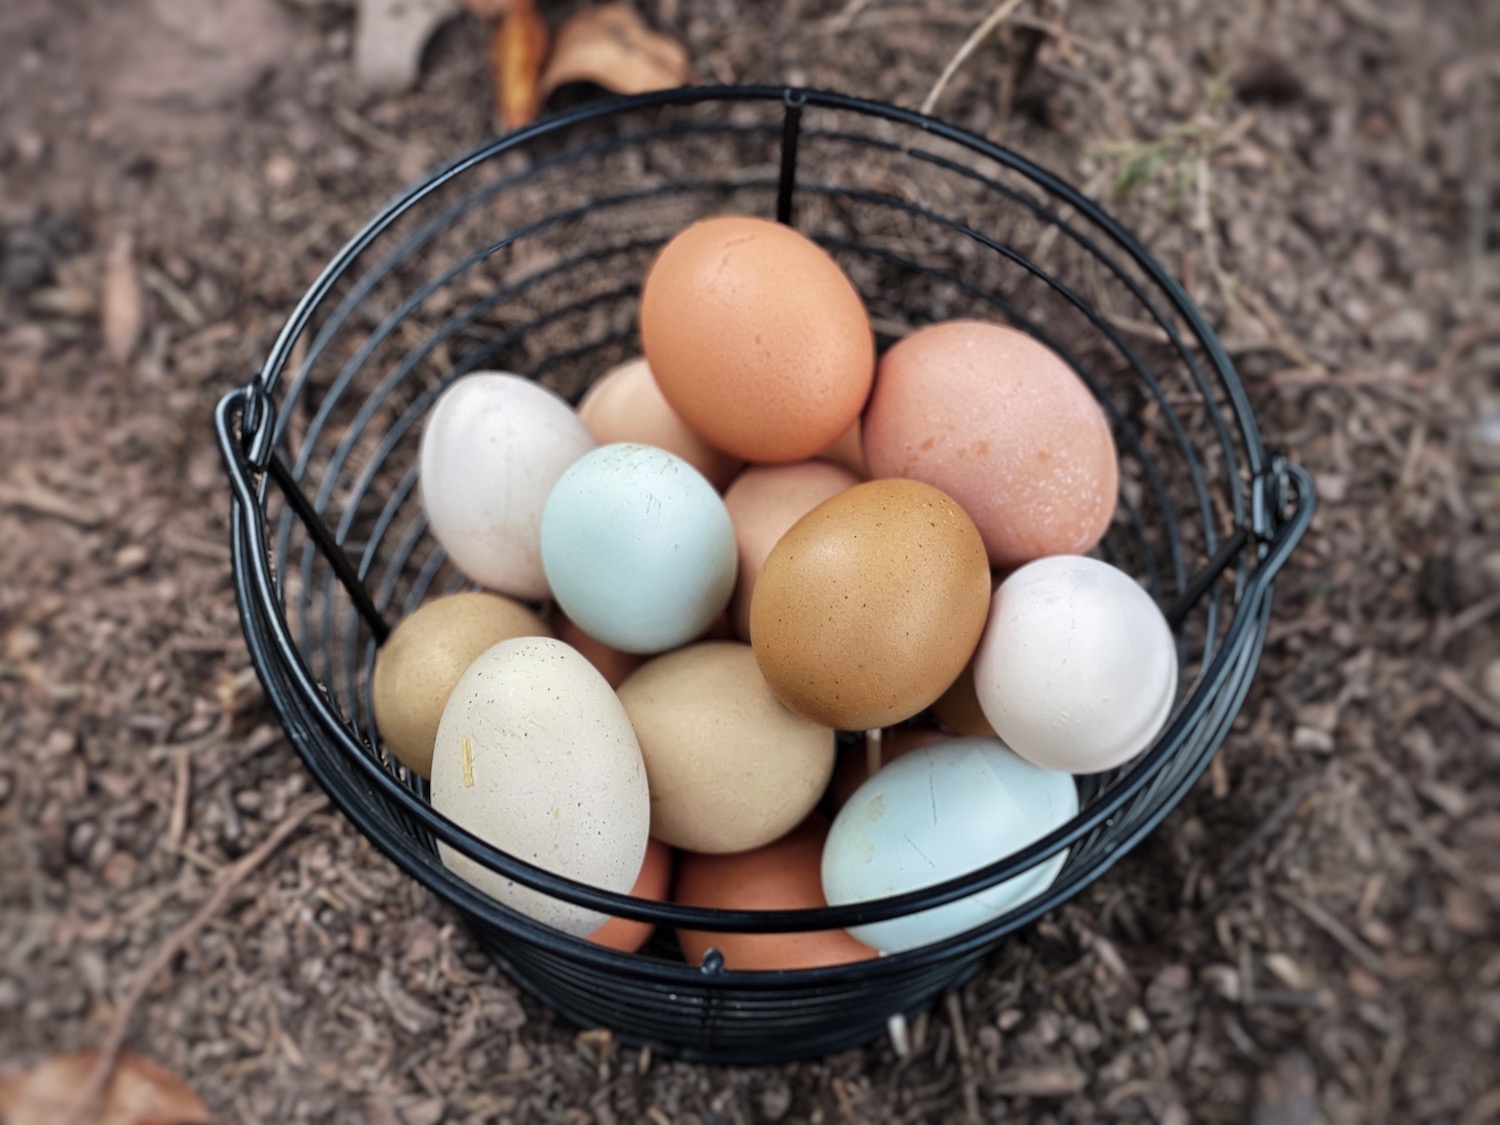 A basket of colorful eggs